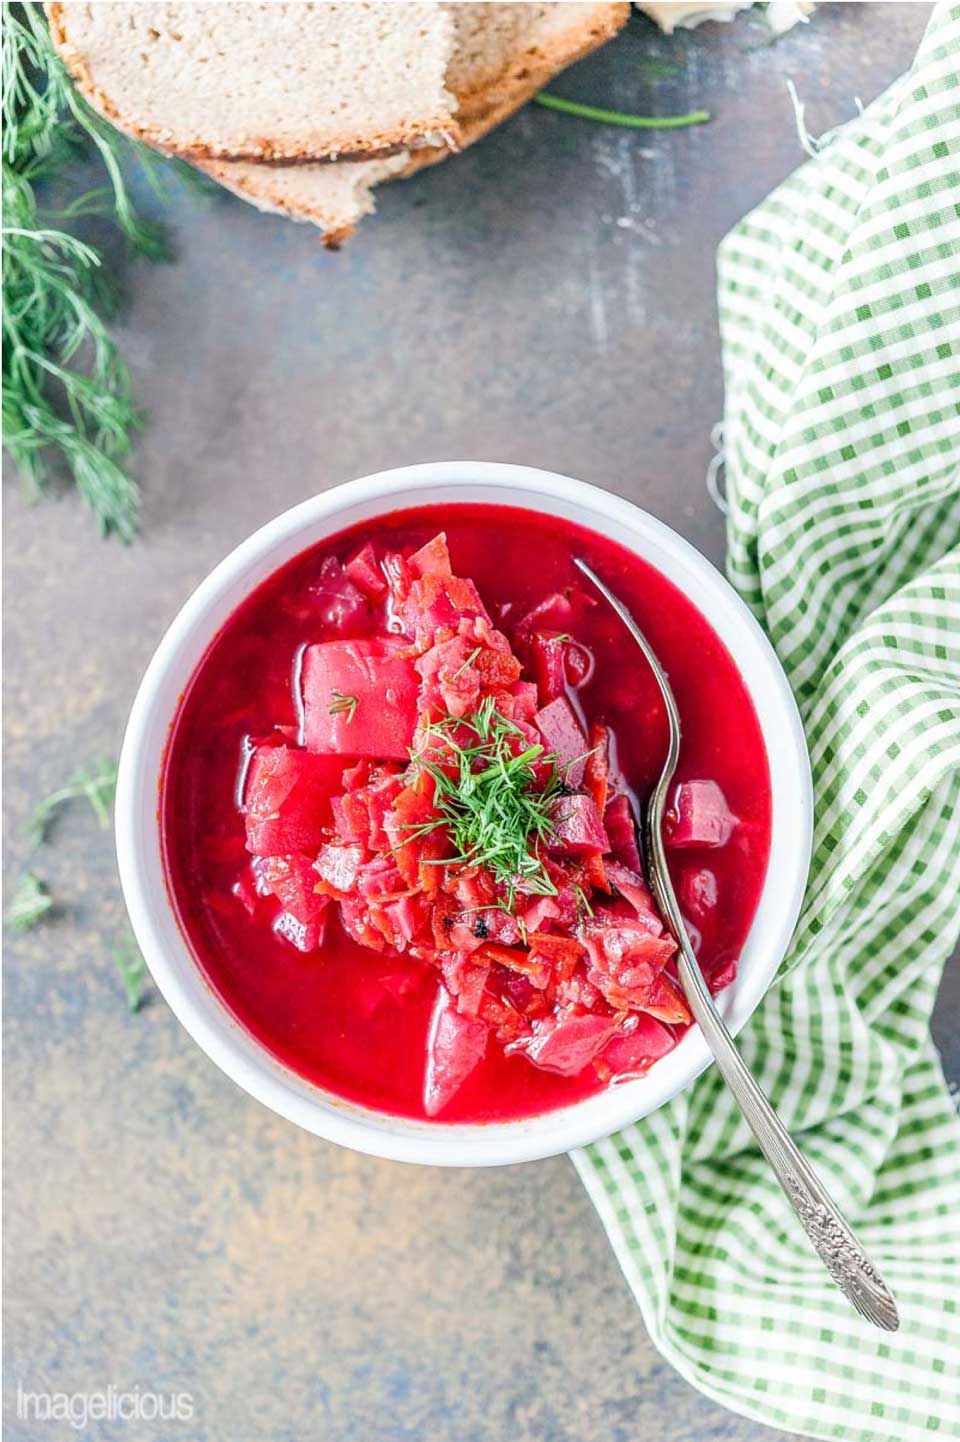 Looking for a quick, easy way to make vegetable soup? You’ve gotta try making veggie soups in your pressure cooker! We’ve got lots of ideas lined up for you, including this gorgeous Instant Pot Borsch (vegan) from Julia at Imagelicious!